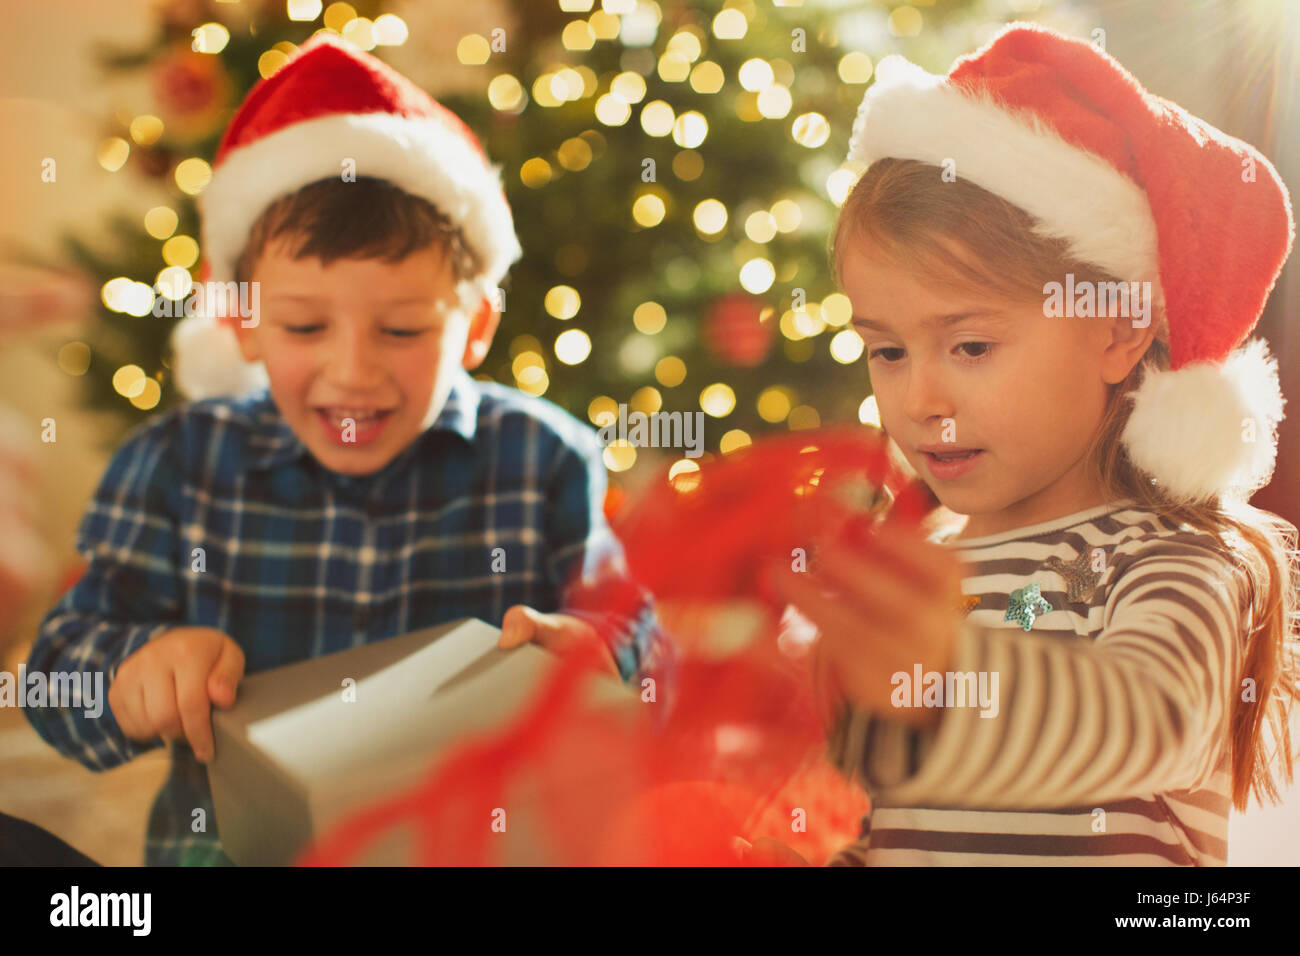 Brother and sister in Santa hats opening Christmas gift Stock Photo